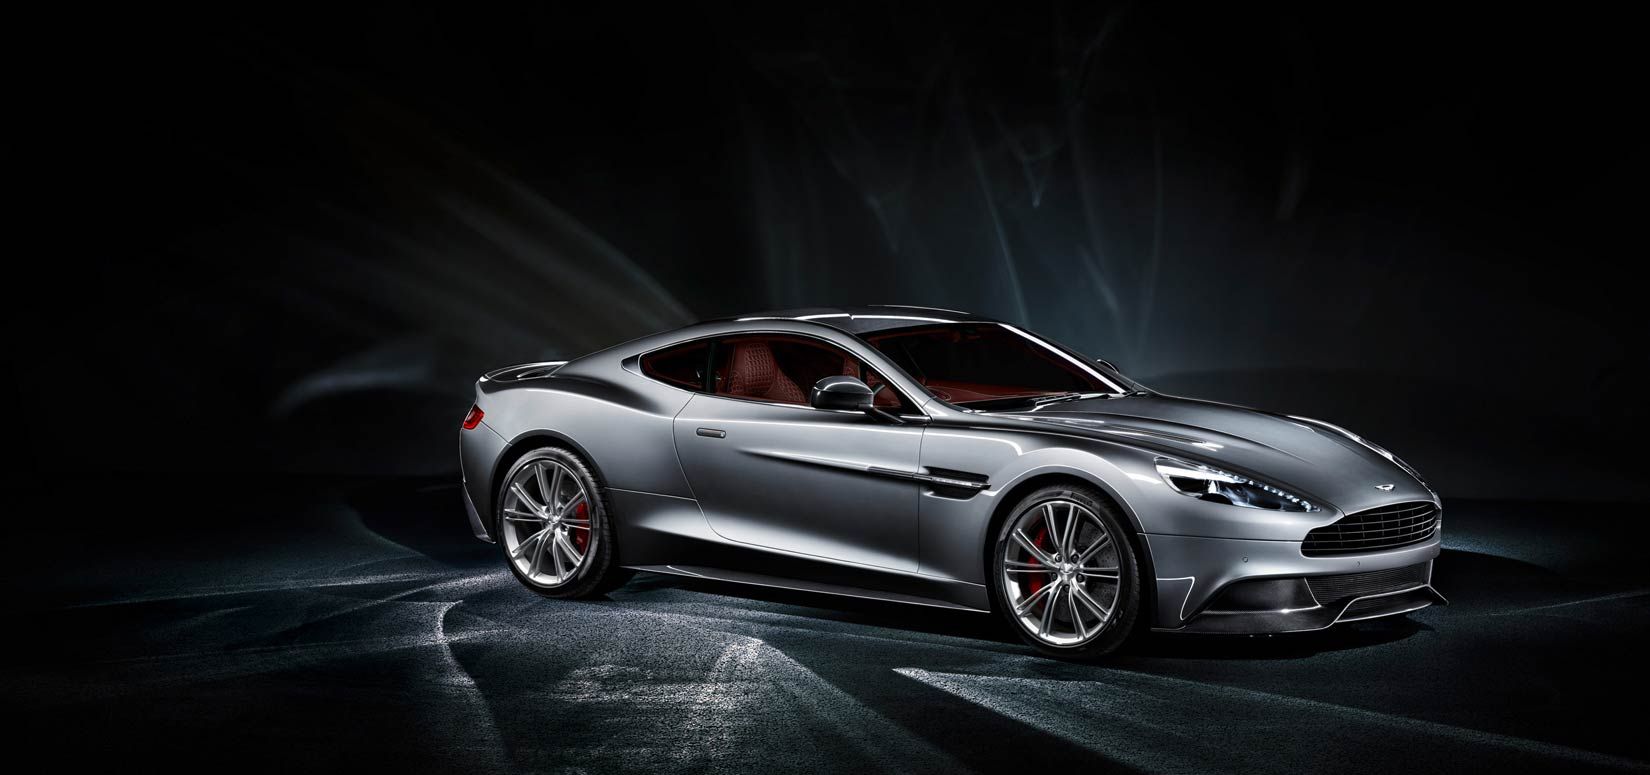 2018 Aston Martin Rakes in $26 Million for Tooling and Design Drawings for the Vanquish